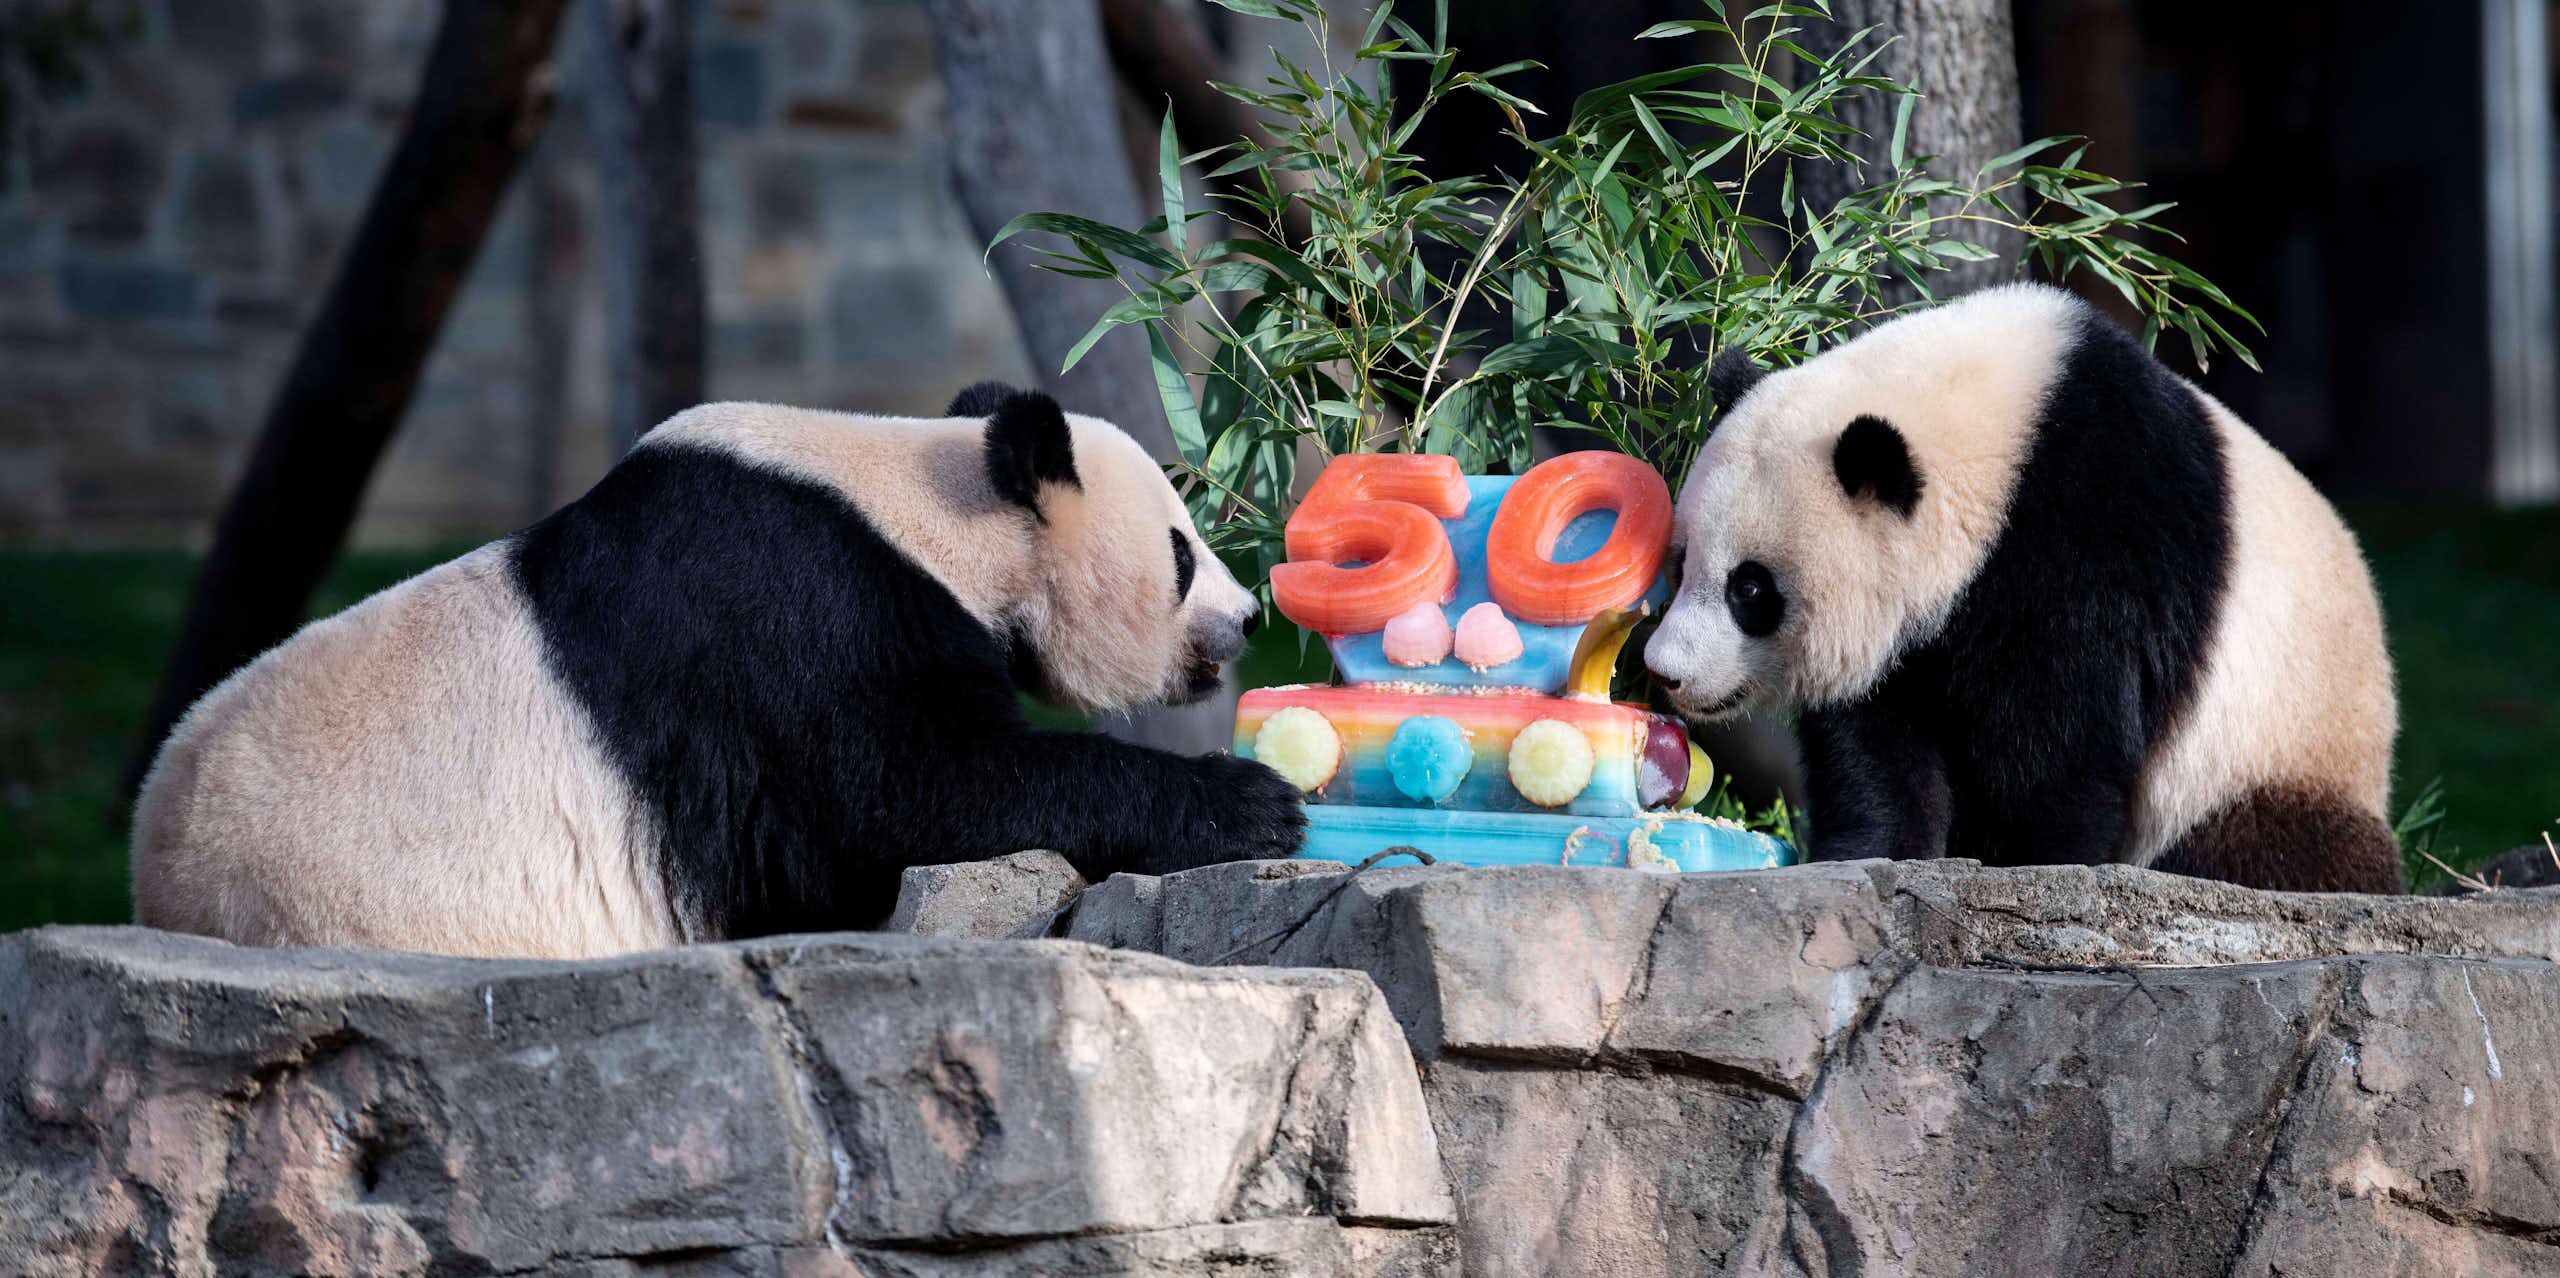 Two pandas next to an ice cake with 50 on it.